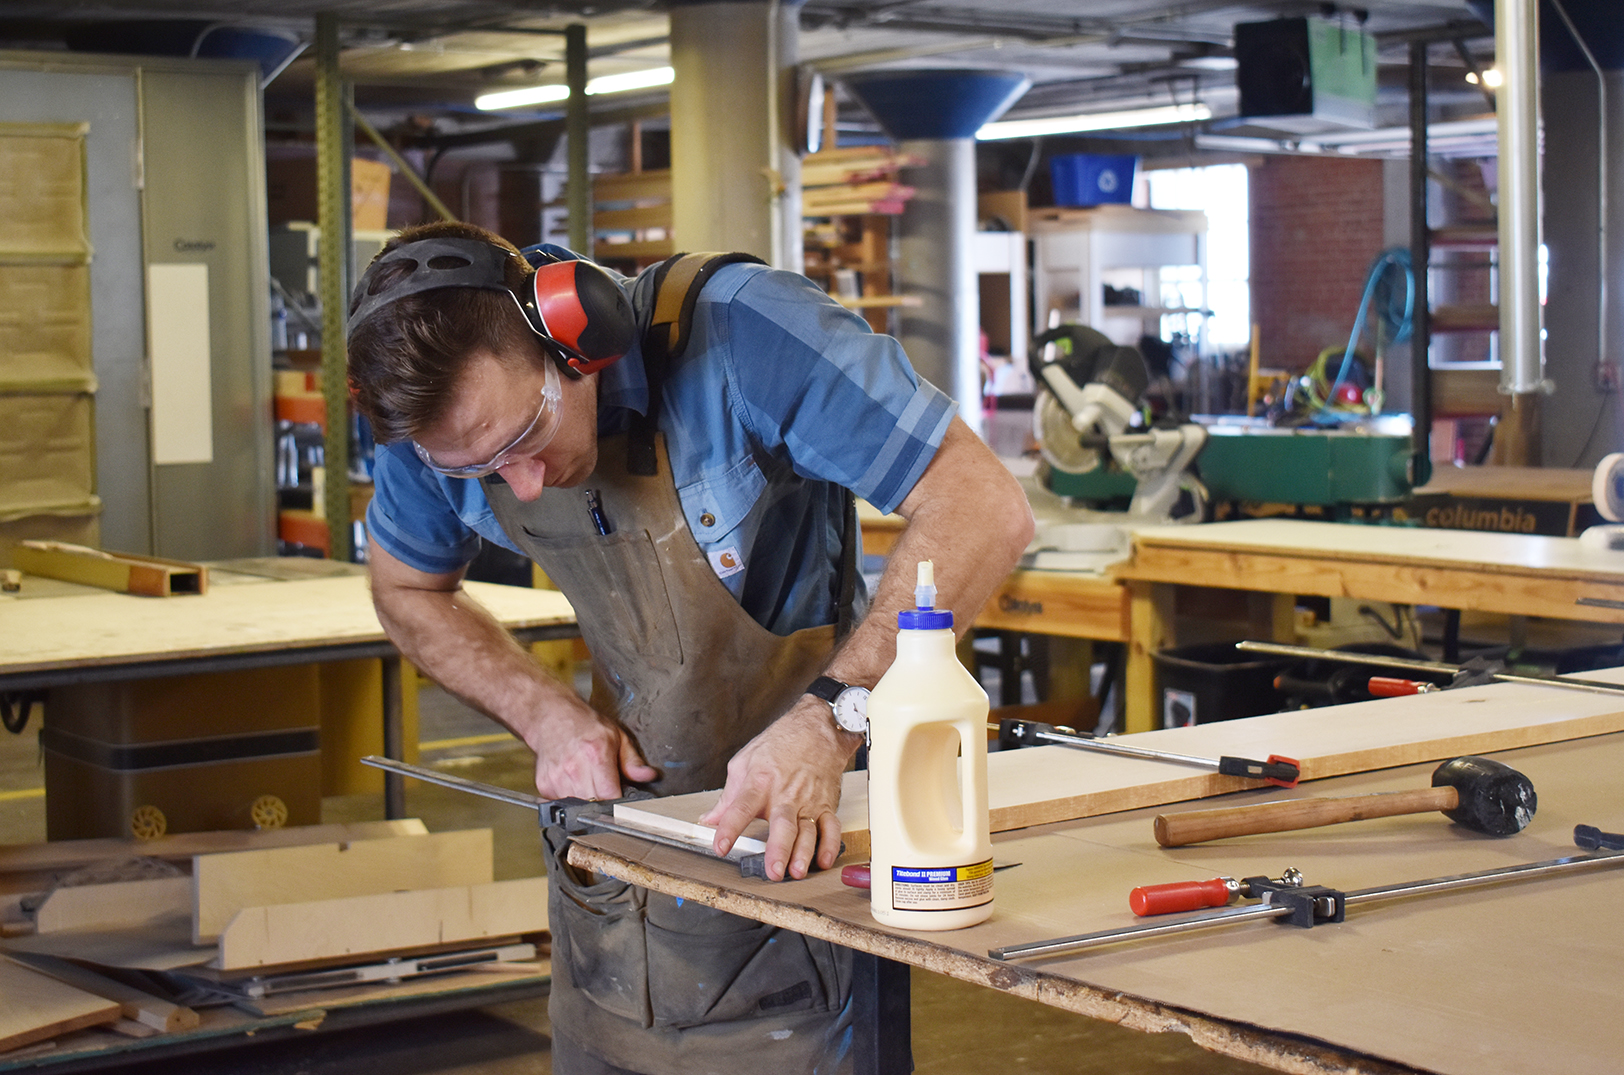 WATCH: Master craftsman builds on military career — a catalyst to avoid wasted opportunity